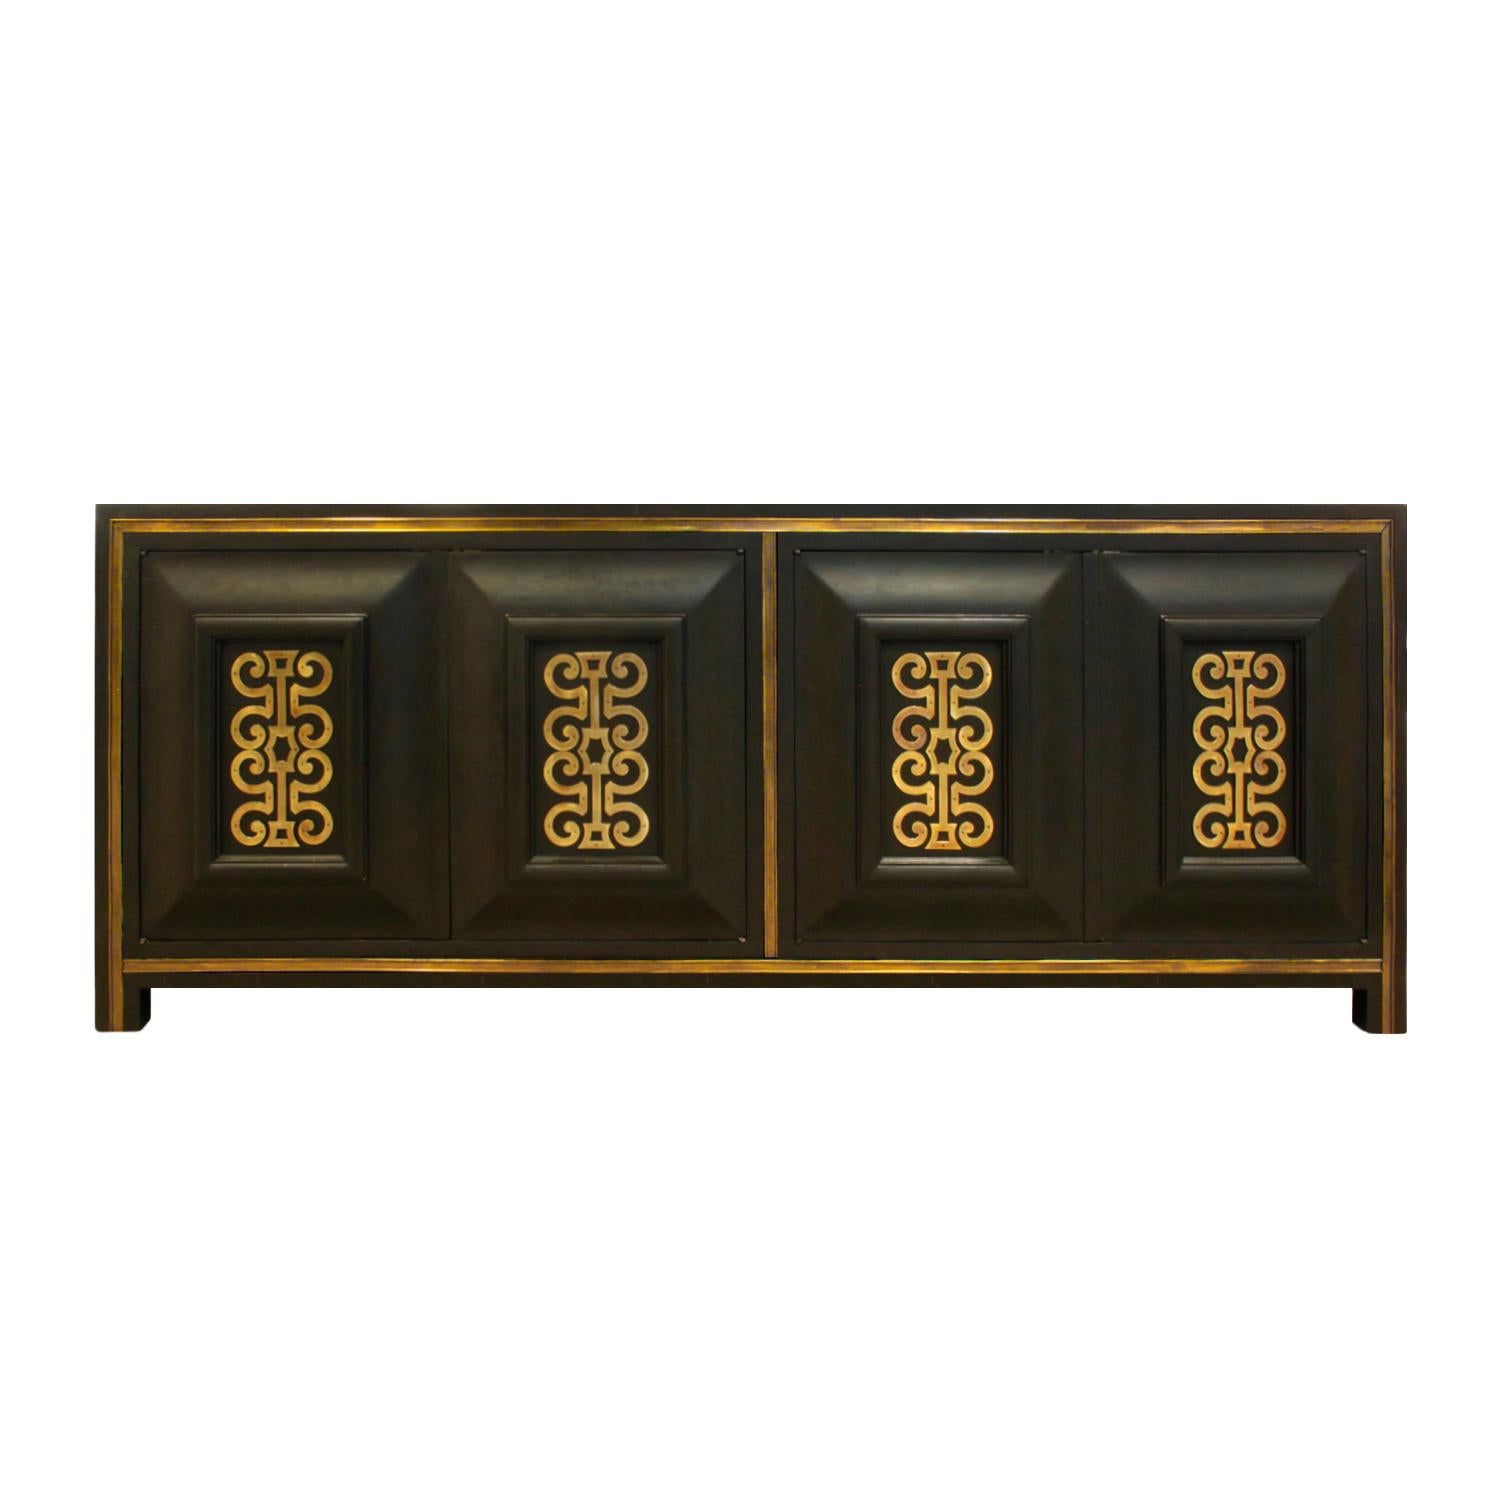 Low credenza in smoke lacquer over Carpathian elm with stylized brass decoration on every door and brass trim by Mastercraft, American, 1960s. This credenza is beautifully crafted and brass details are exceptional.